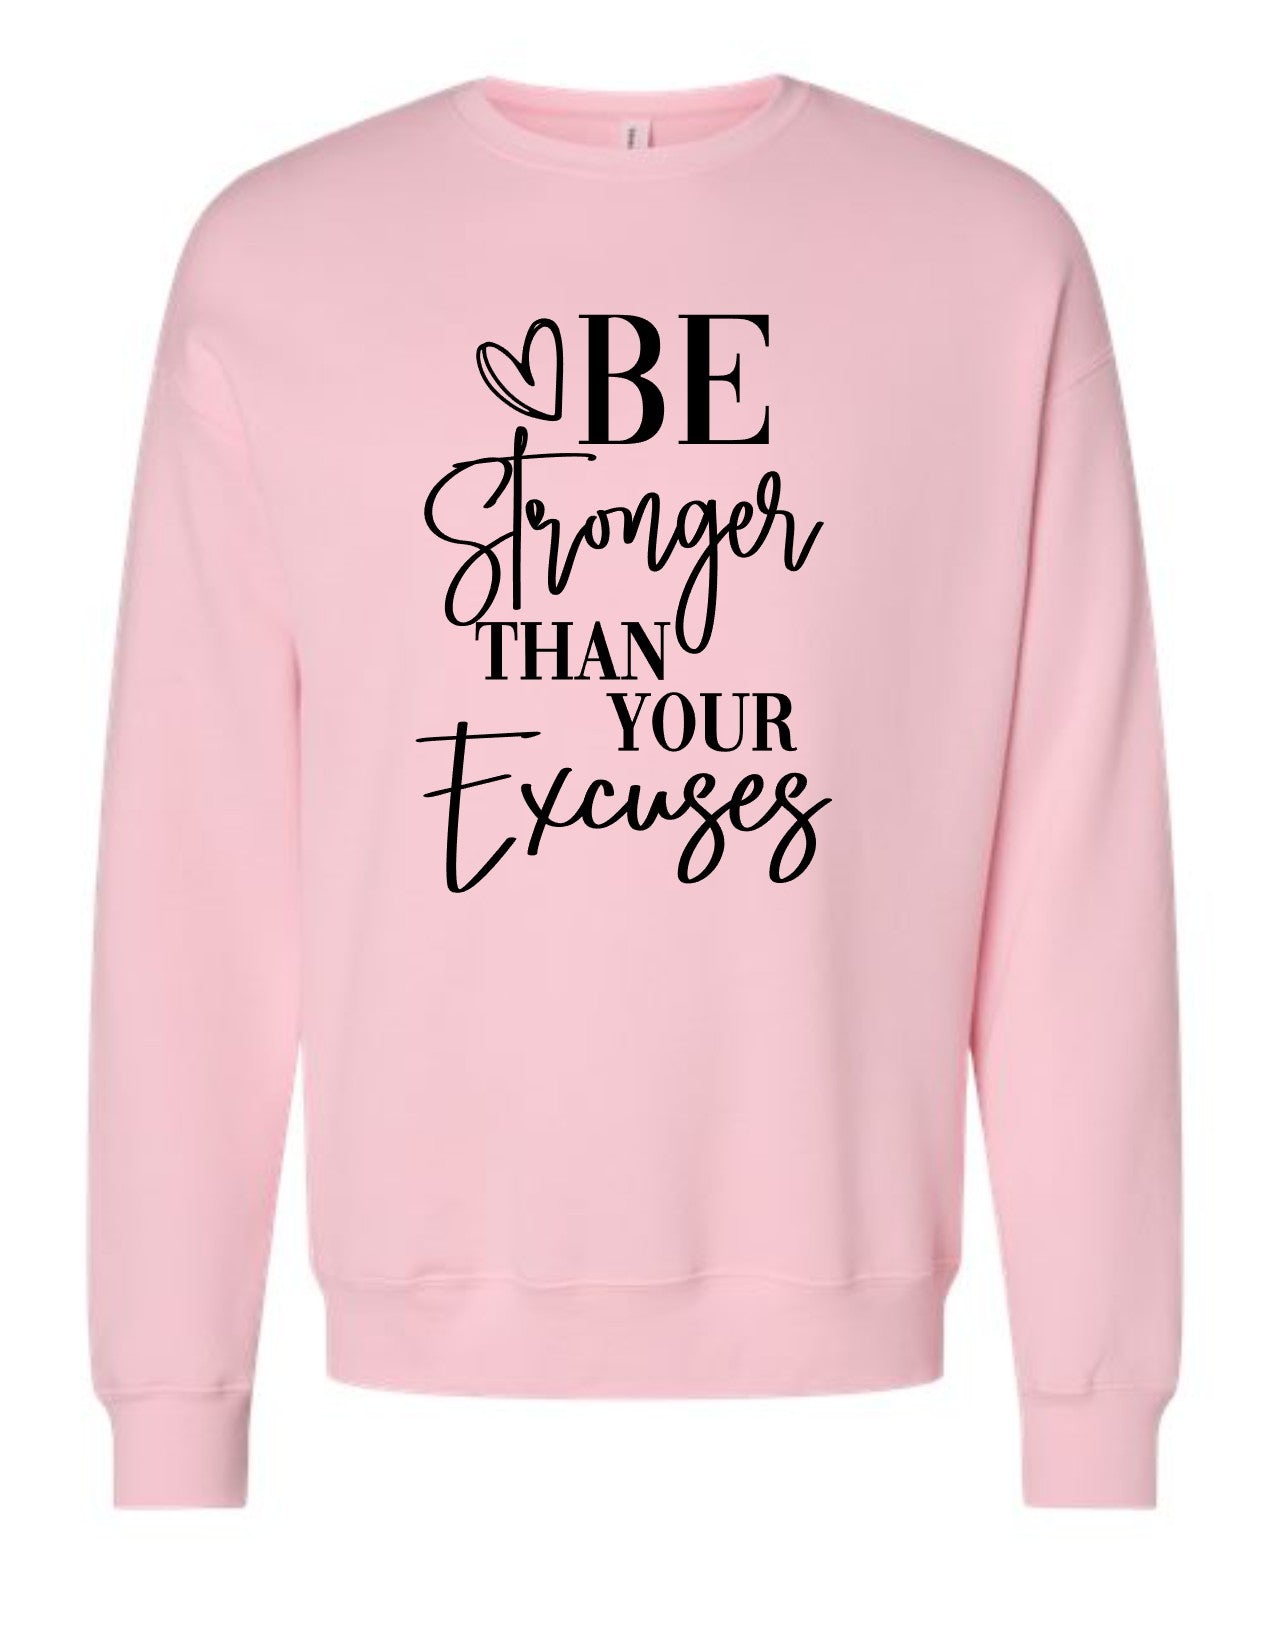 Be Stronger Than Your Excuses sweatshirt